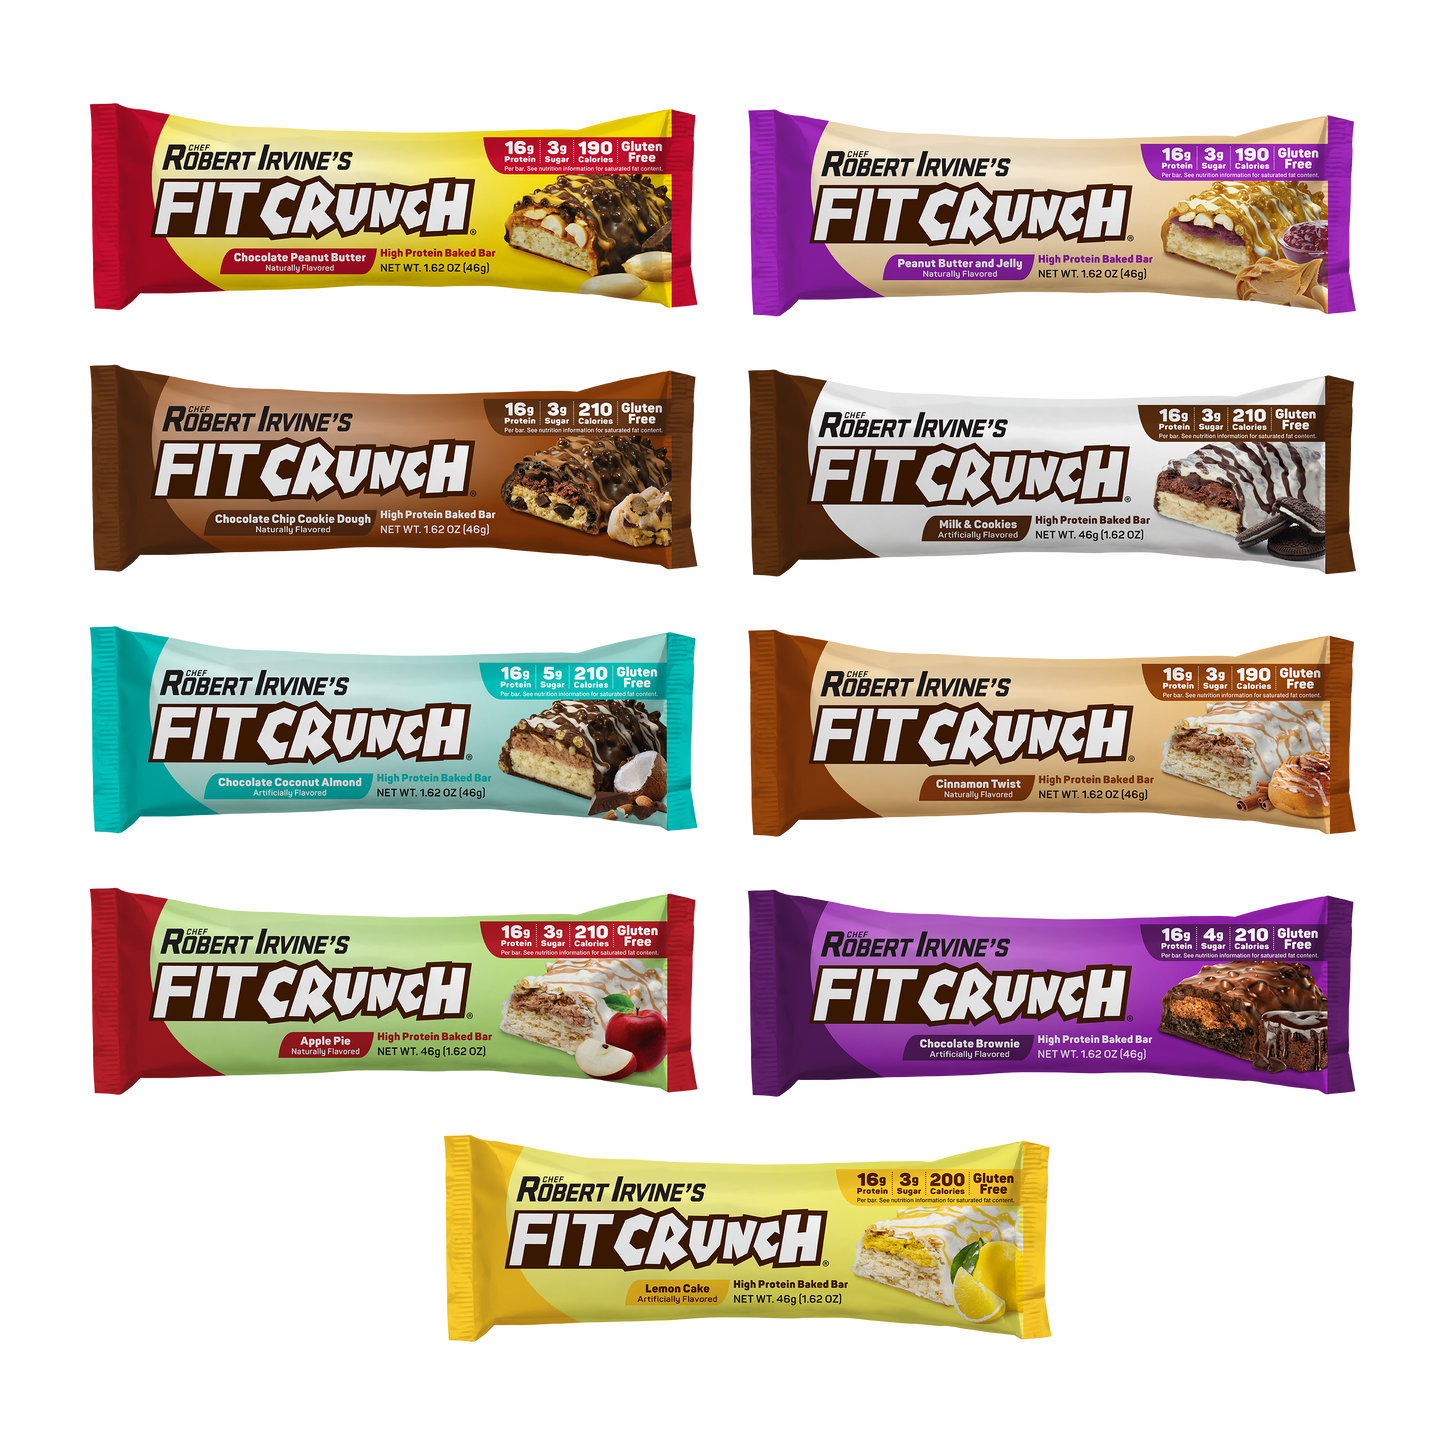 assortment of protein bar wrappers